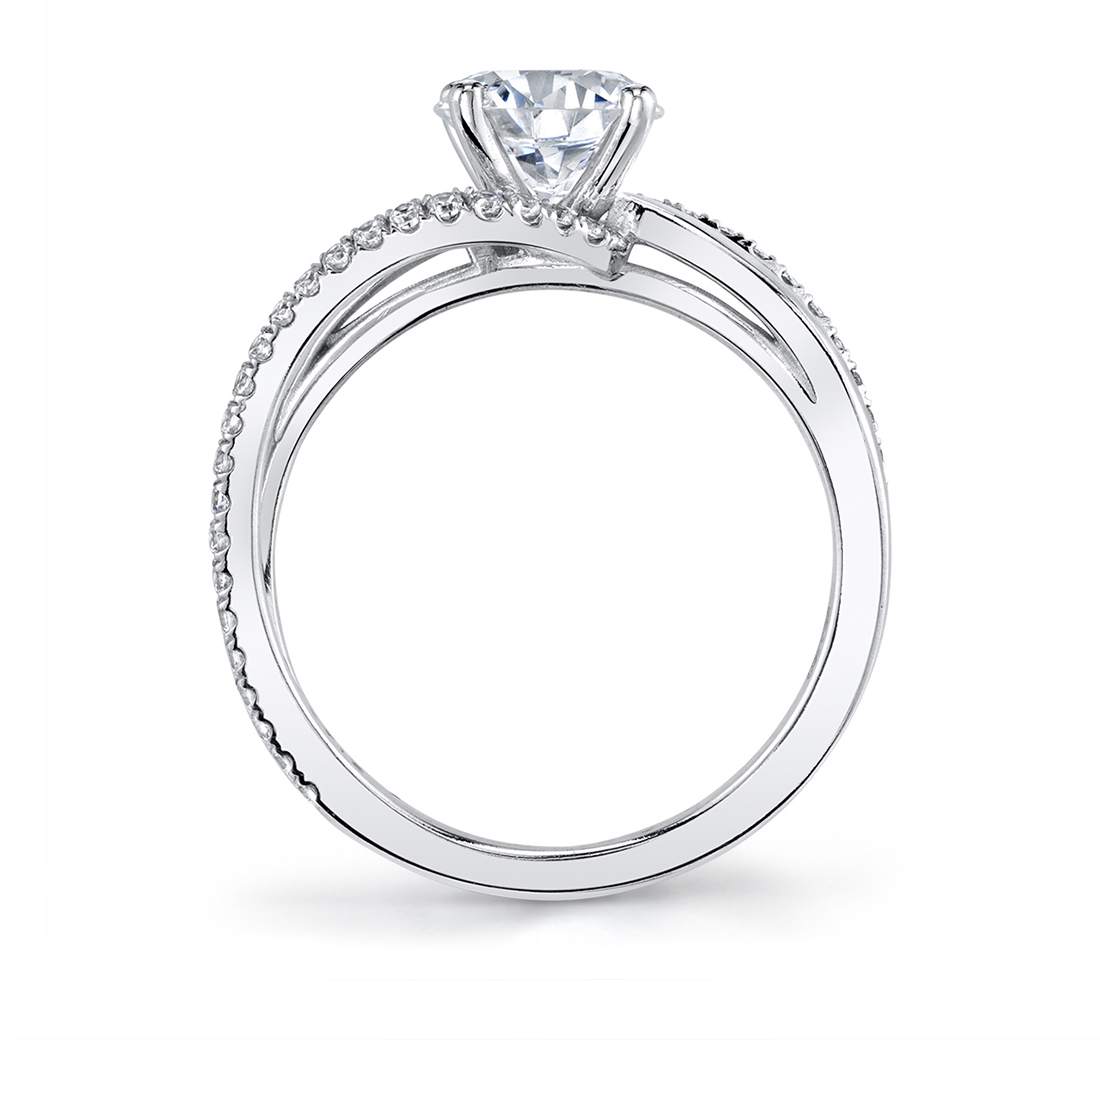 Profile Image of a Split Band Engagement Ring - Flavia